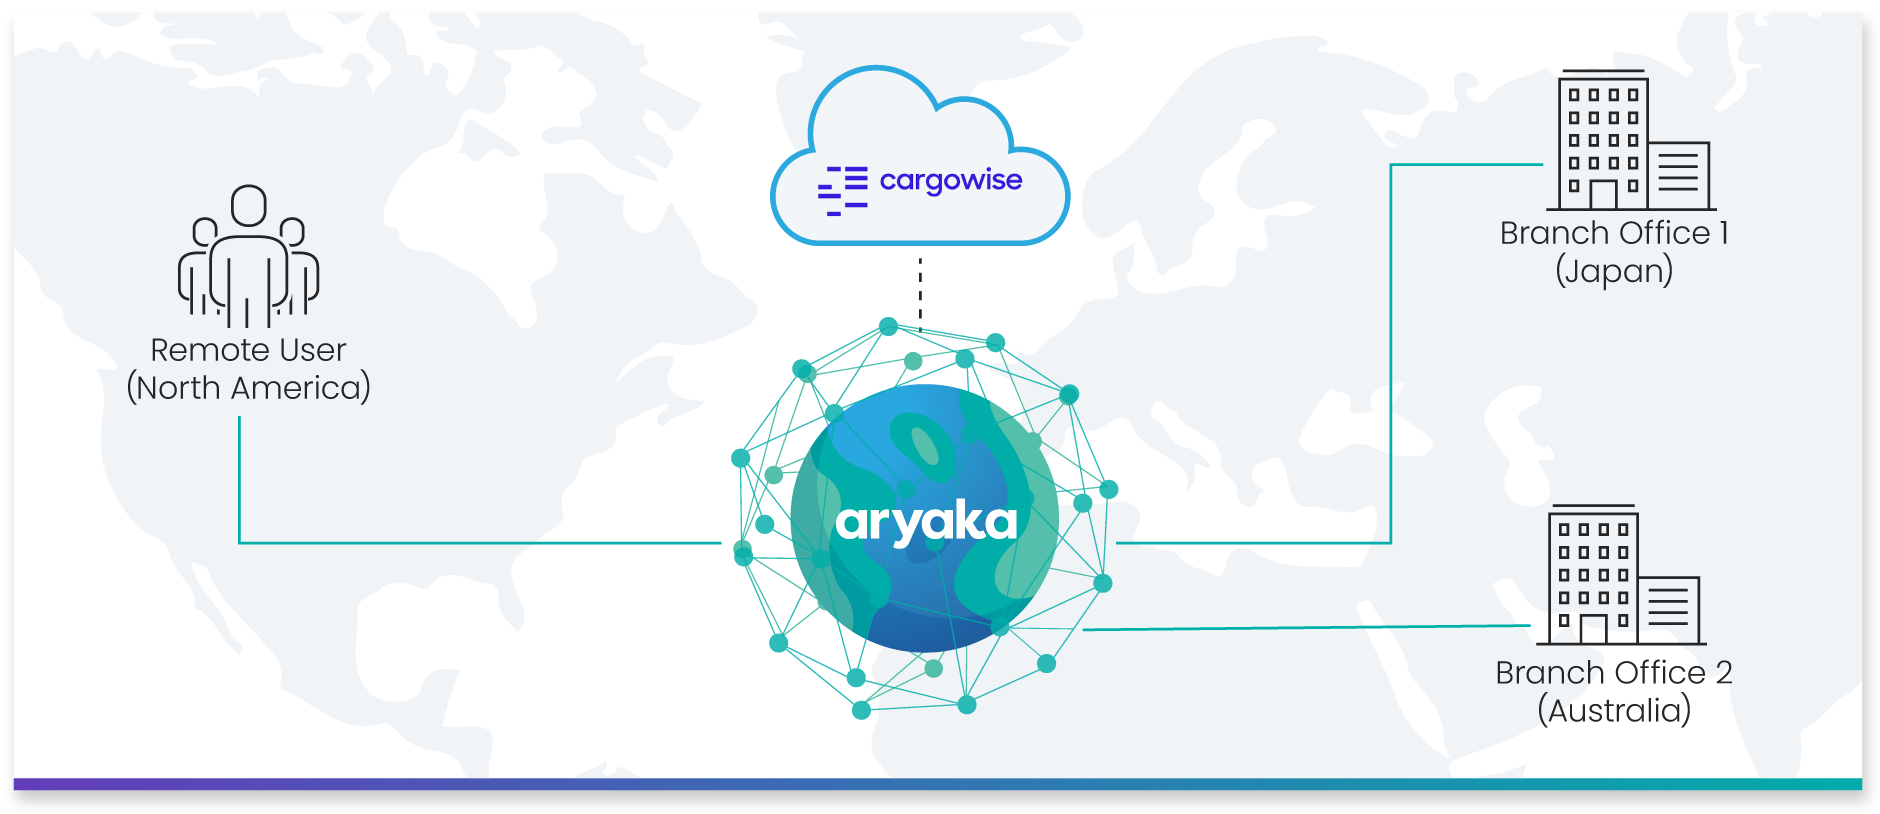 CargoWise on SD-WAN